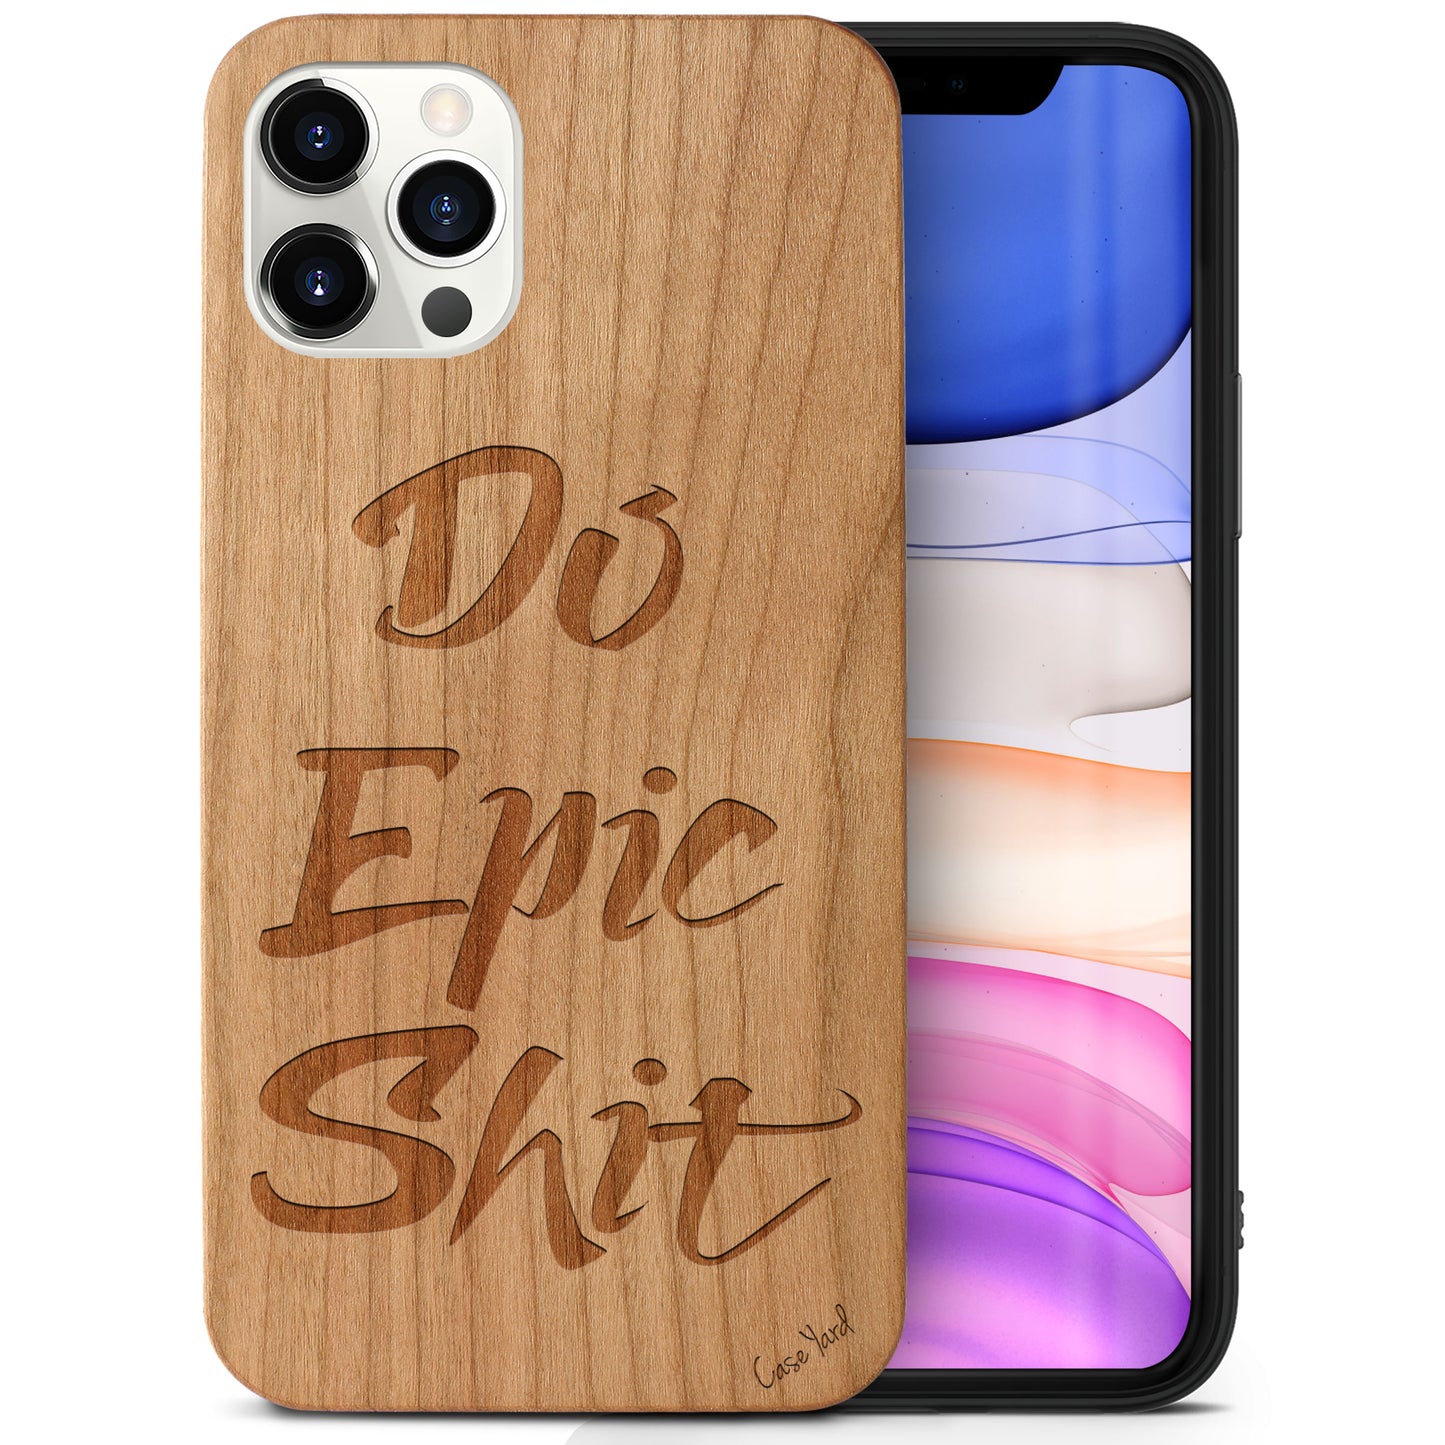 Wooden Cell Phone Case Cover, Laser Engraved case for iPhone & Samsung phone Do Epic Shit Design